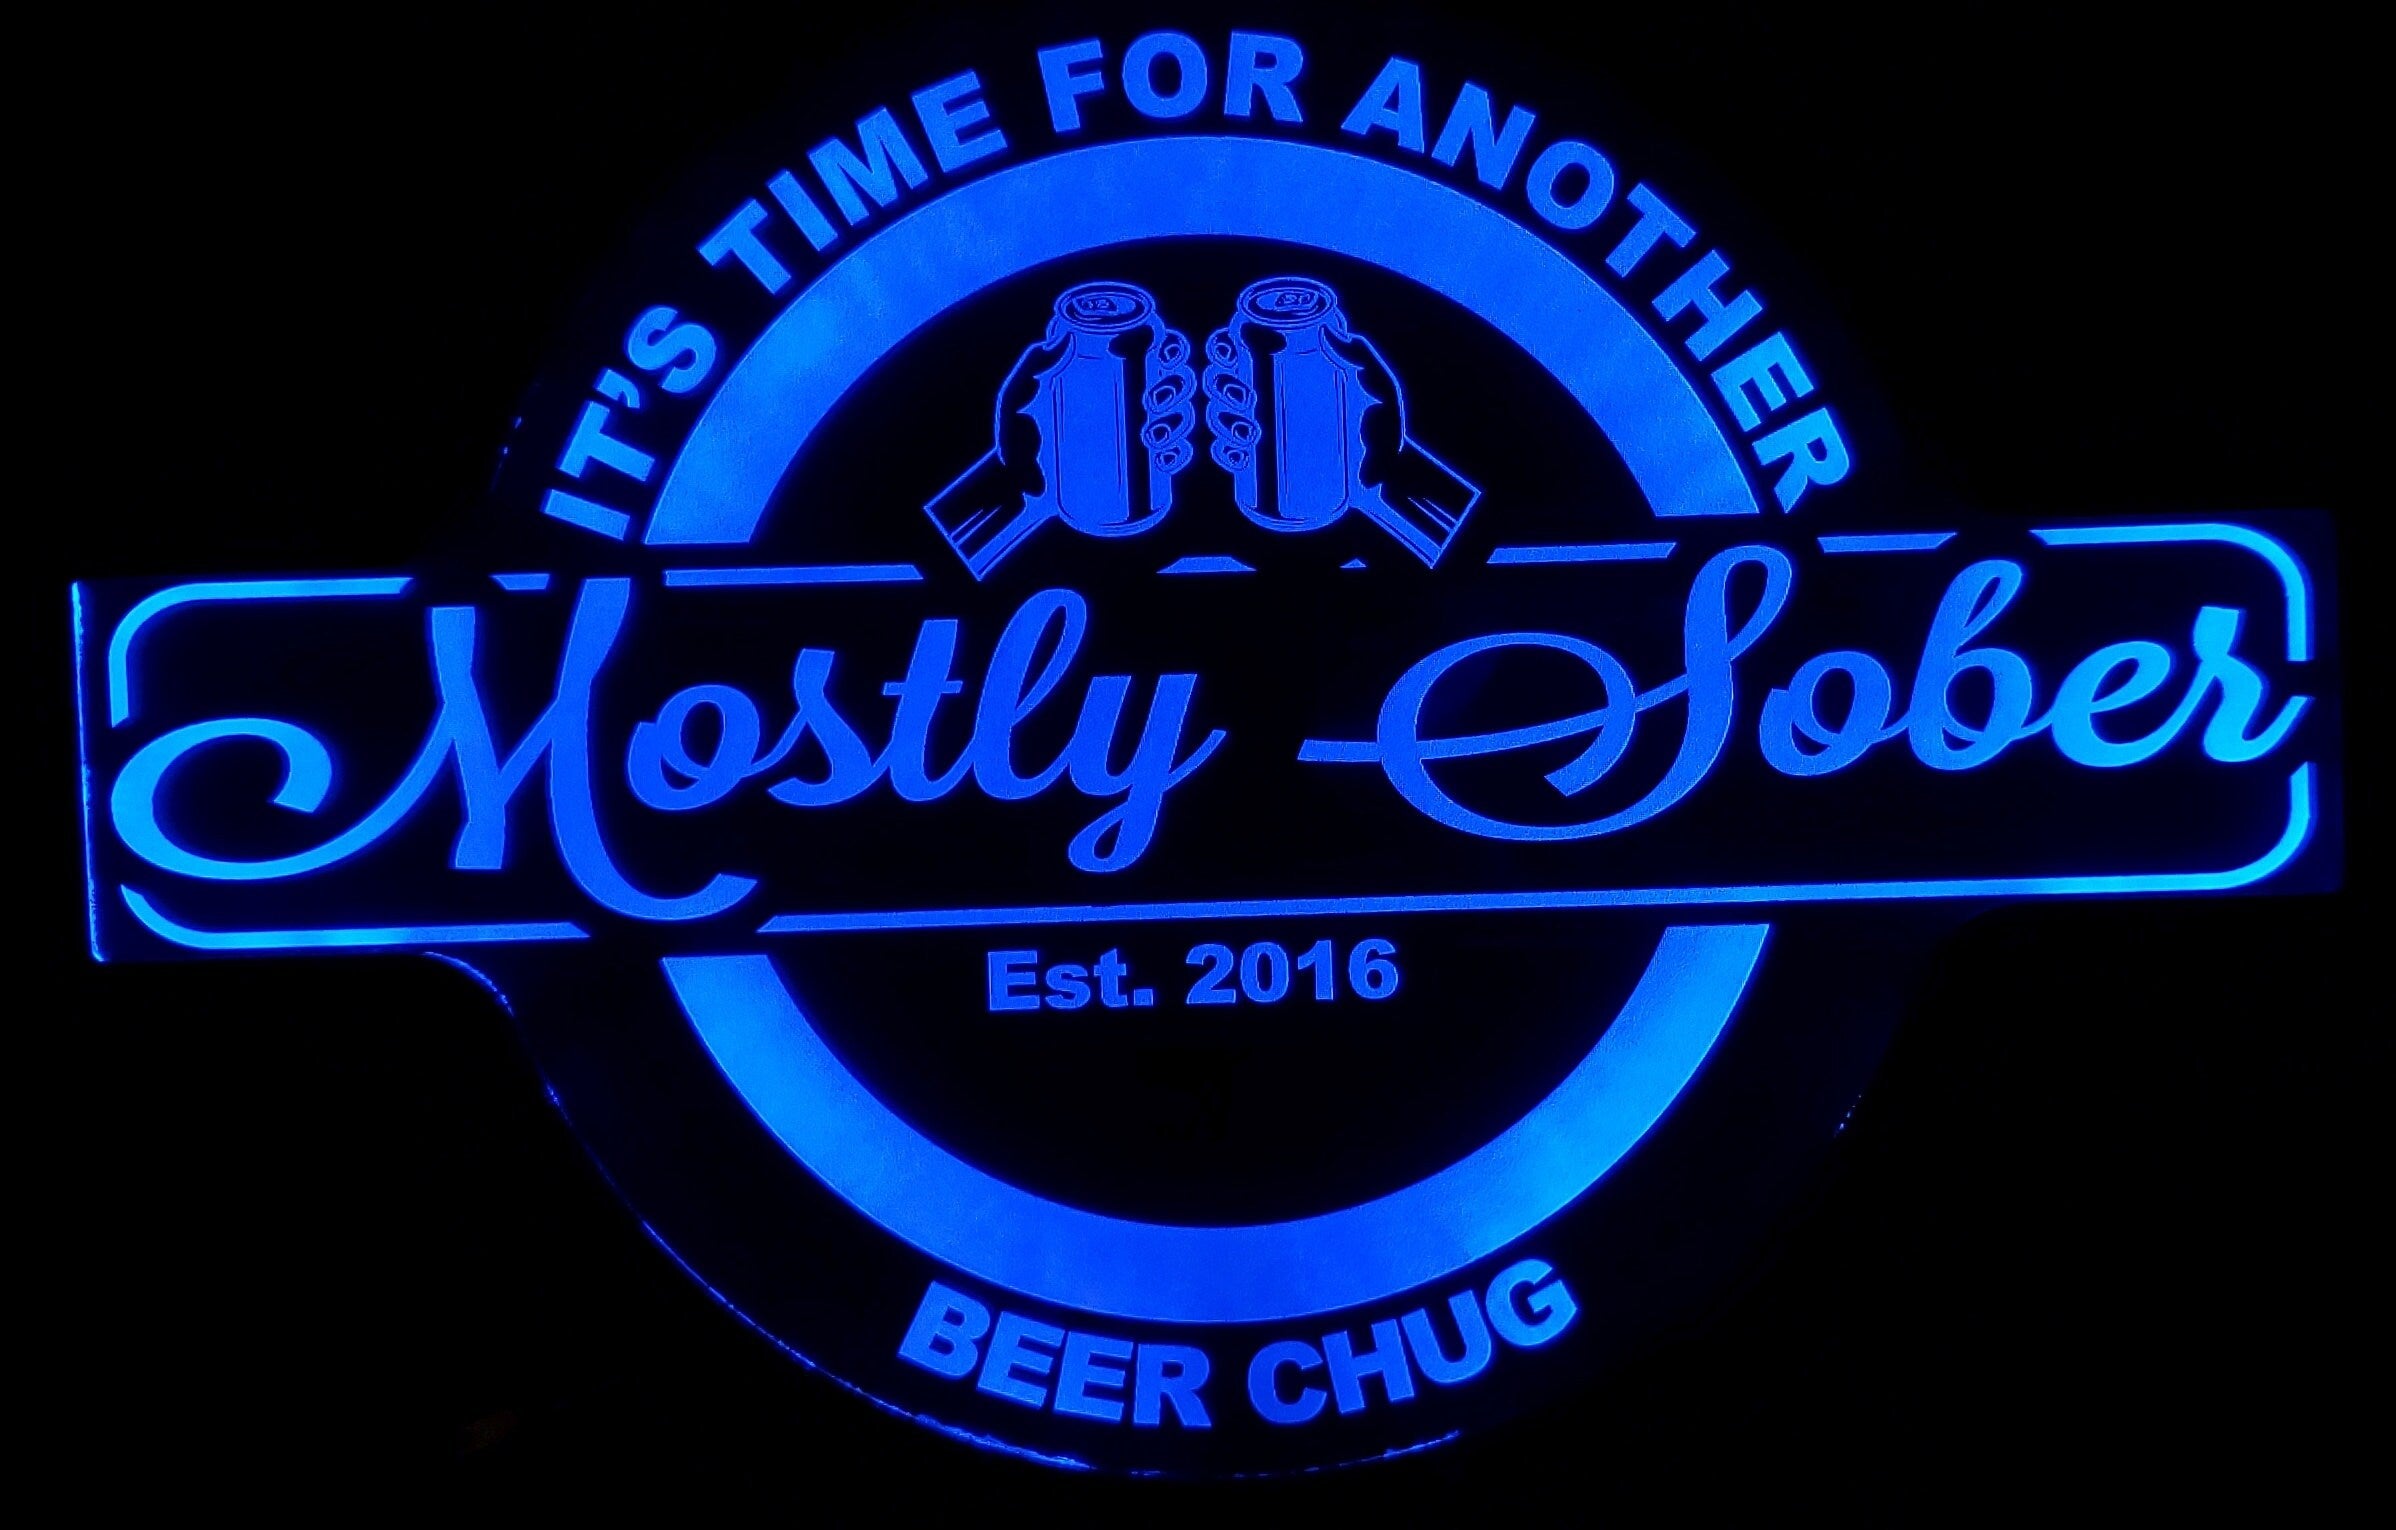 Custom Beer Chug Led Wall Sign Neon Like - Color Changing Remote Control - 4 Sizes Free Shipping